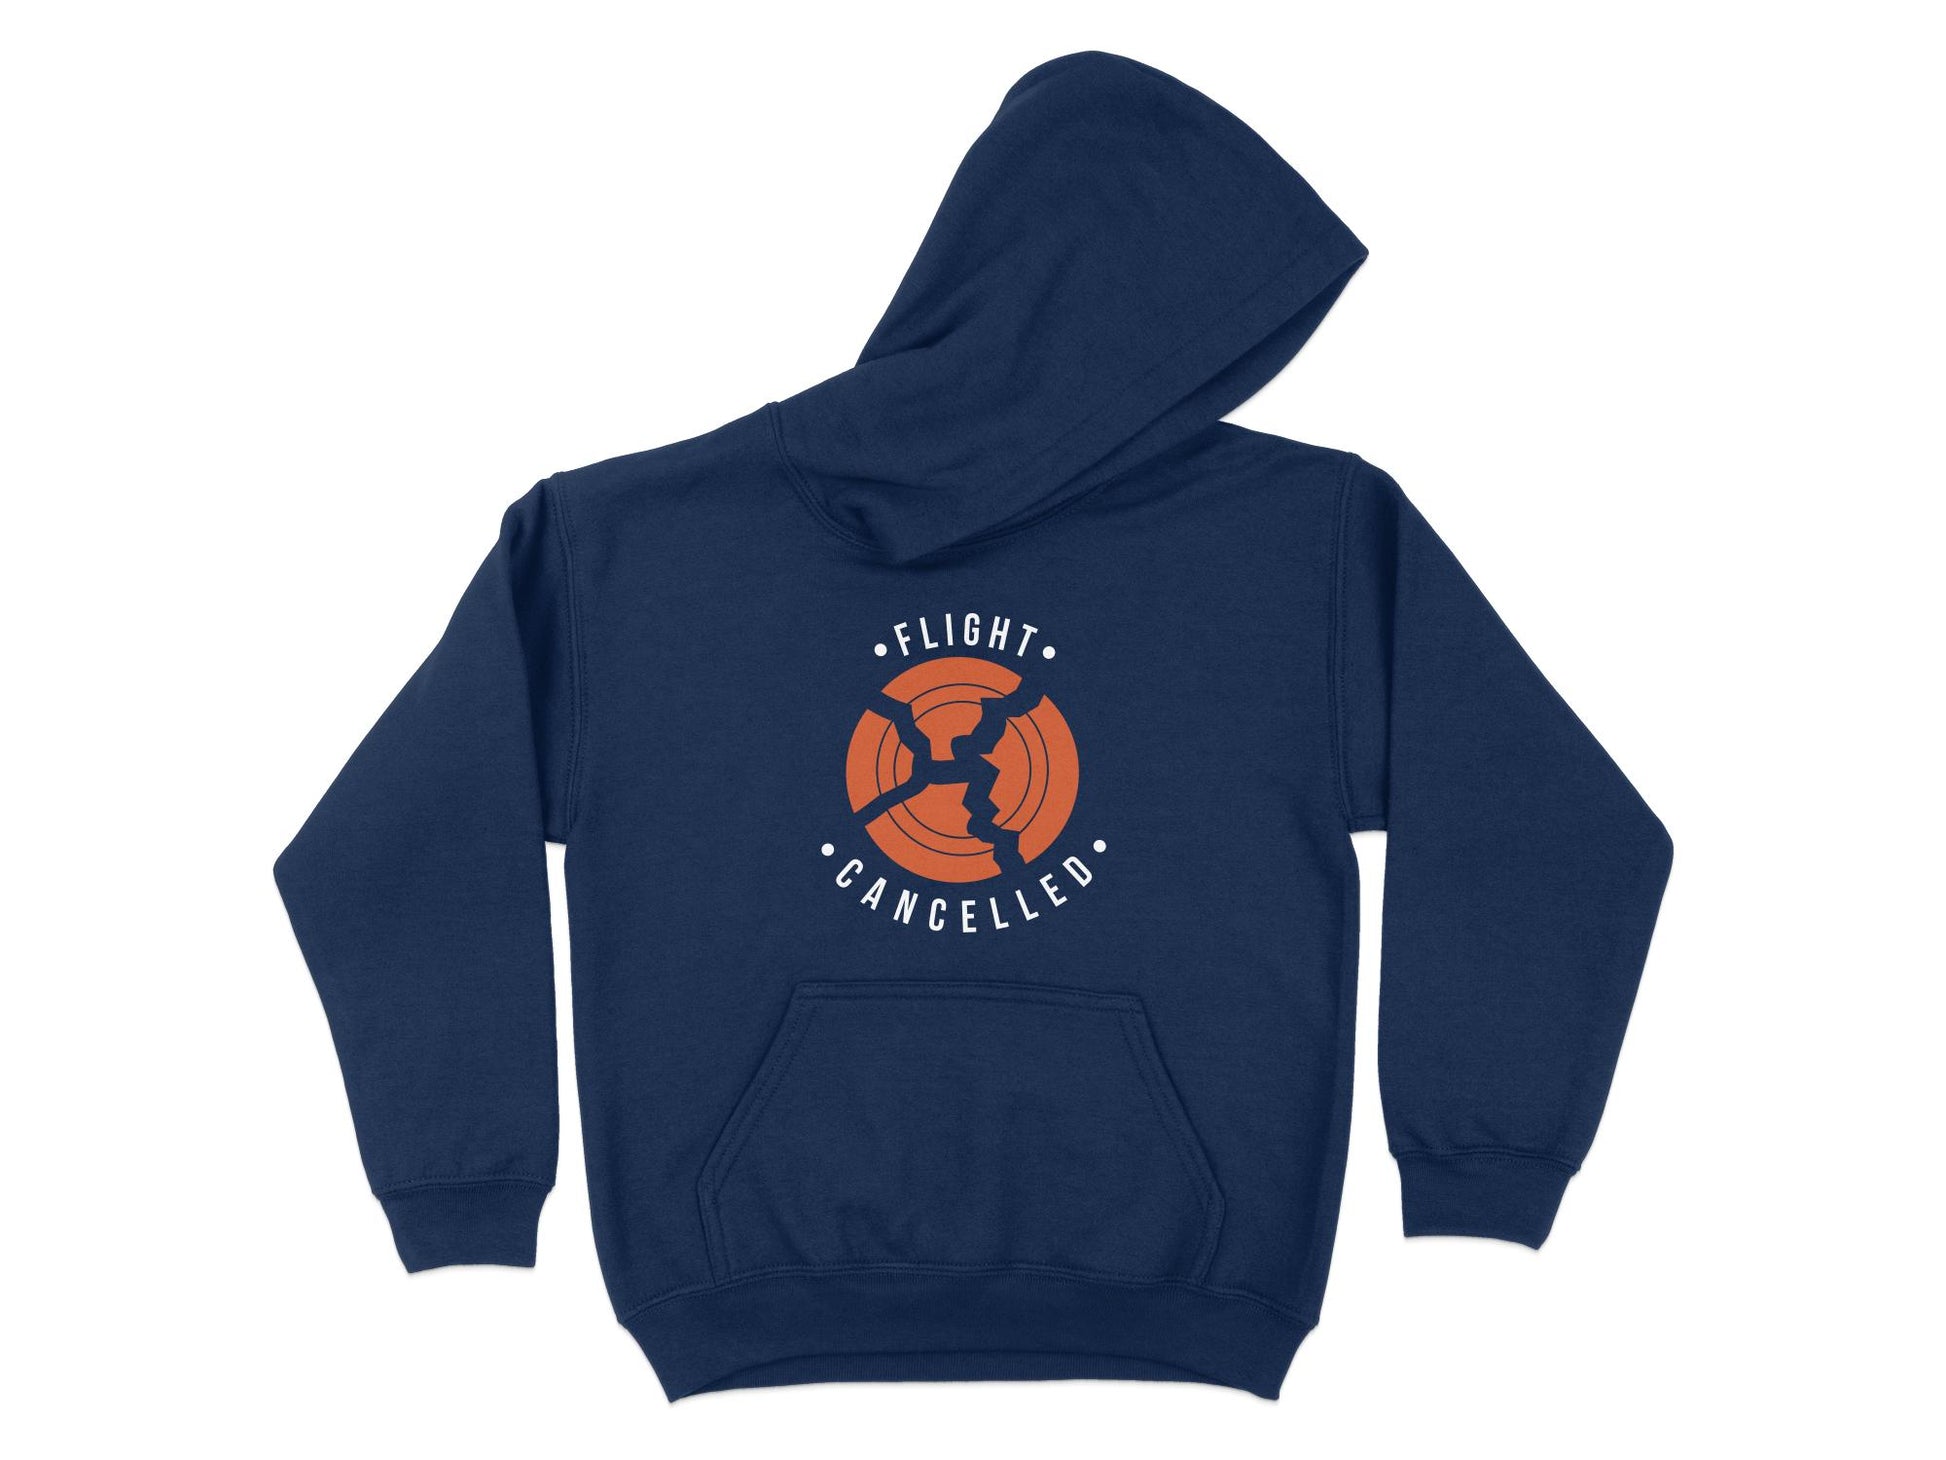 Trap Shooting Hoodie - Flight Cancelled, navy blue